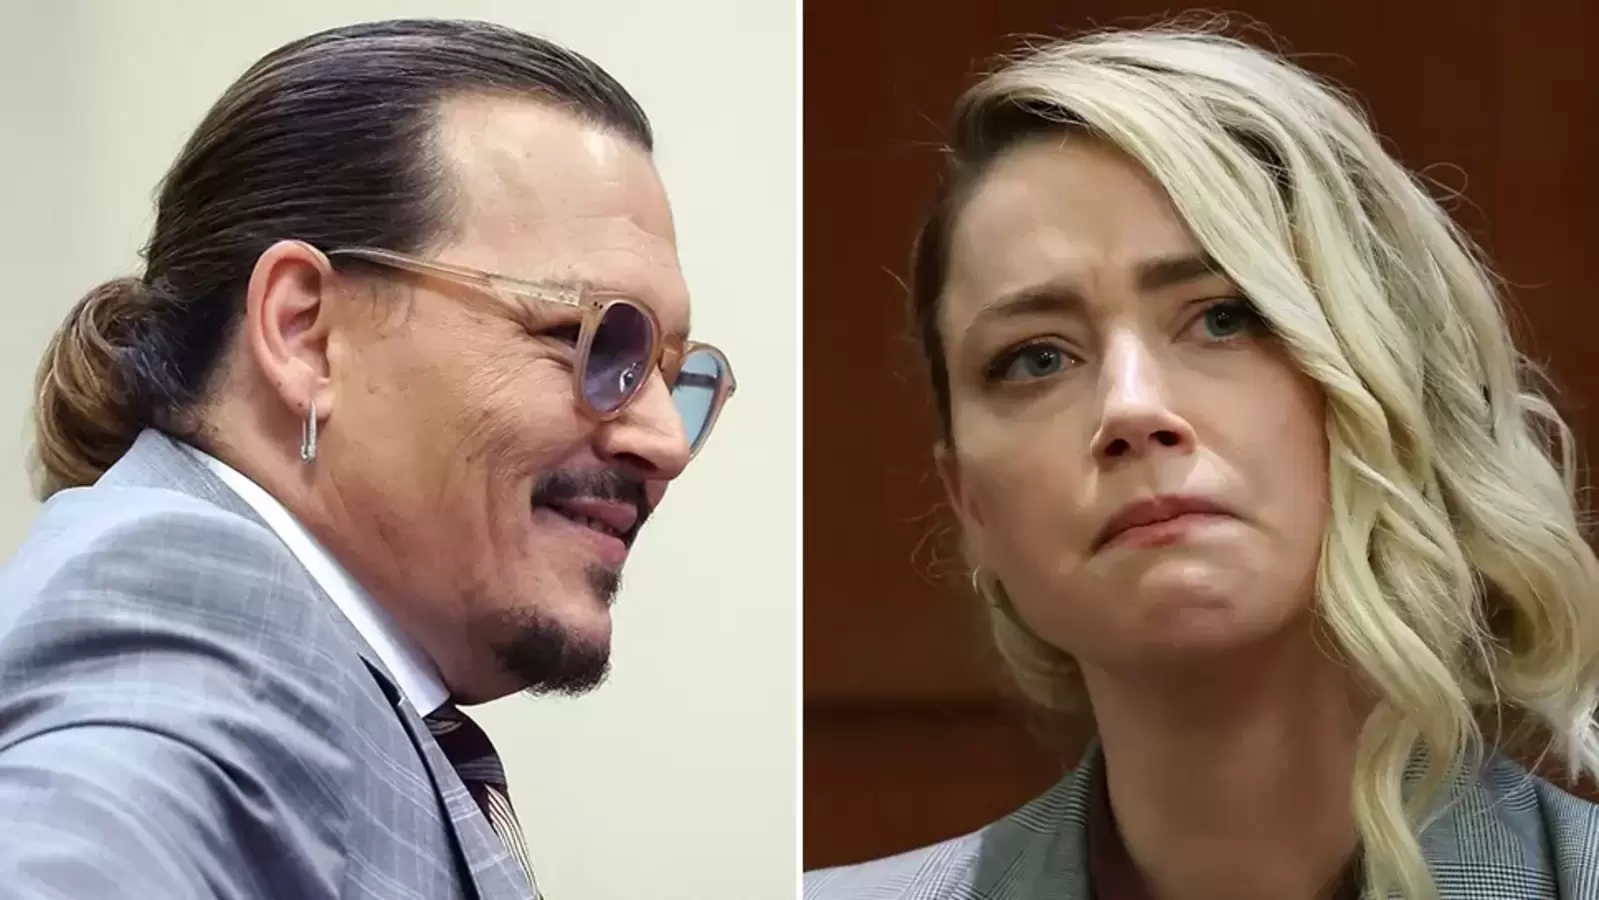 Demand for Johnny Depp’s Dior fragrance soared during trial against Amber Heard